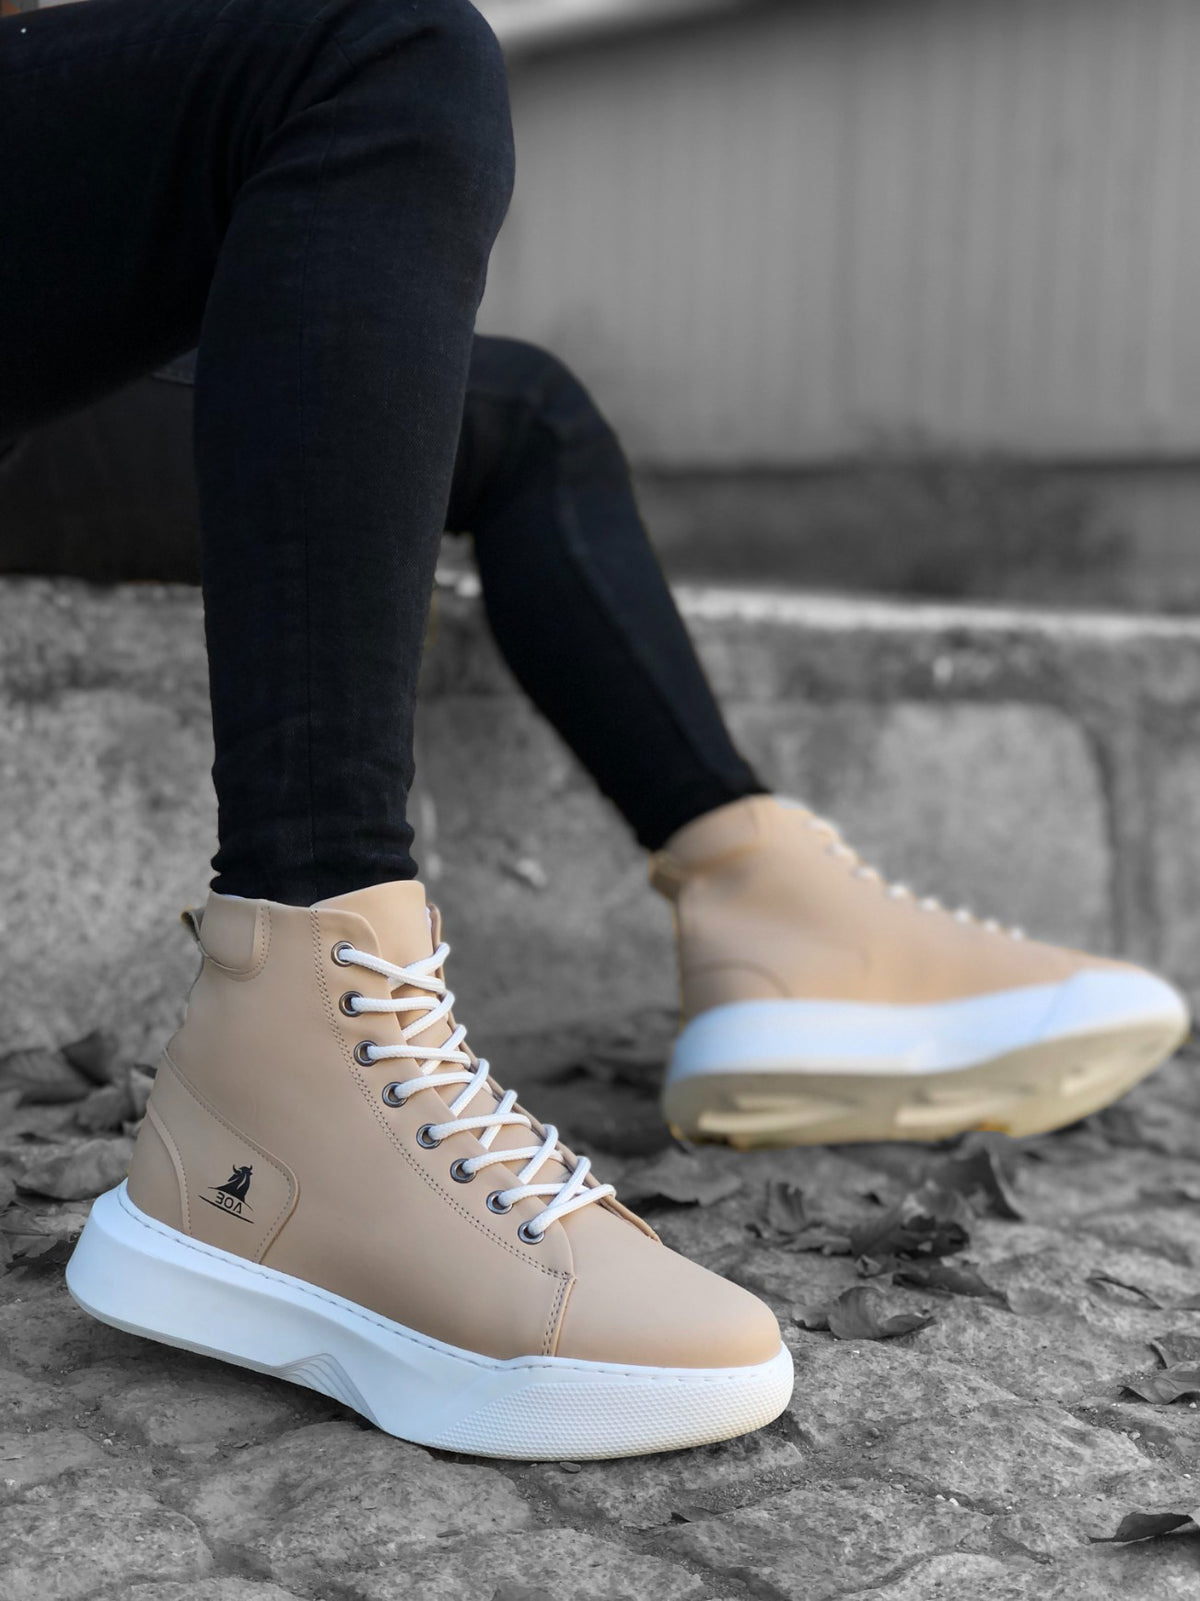 BA0155 Lace-up Men's High-Sole Cream White Sole Sports Boots - STREETMODE ™